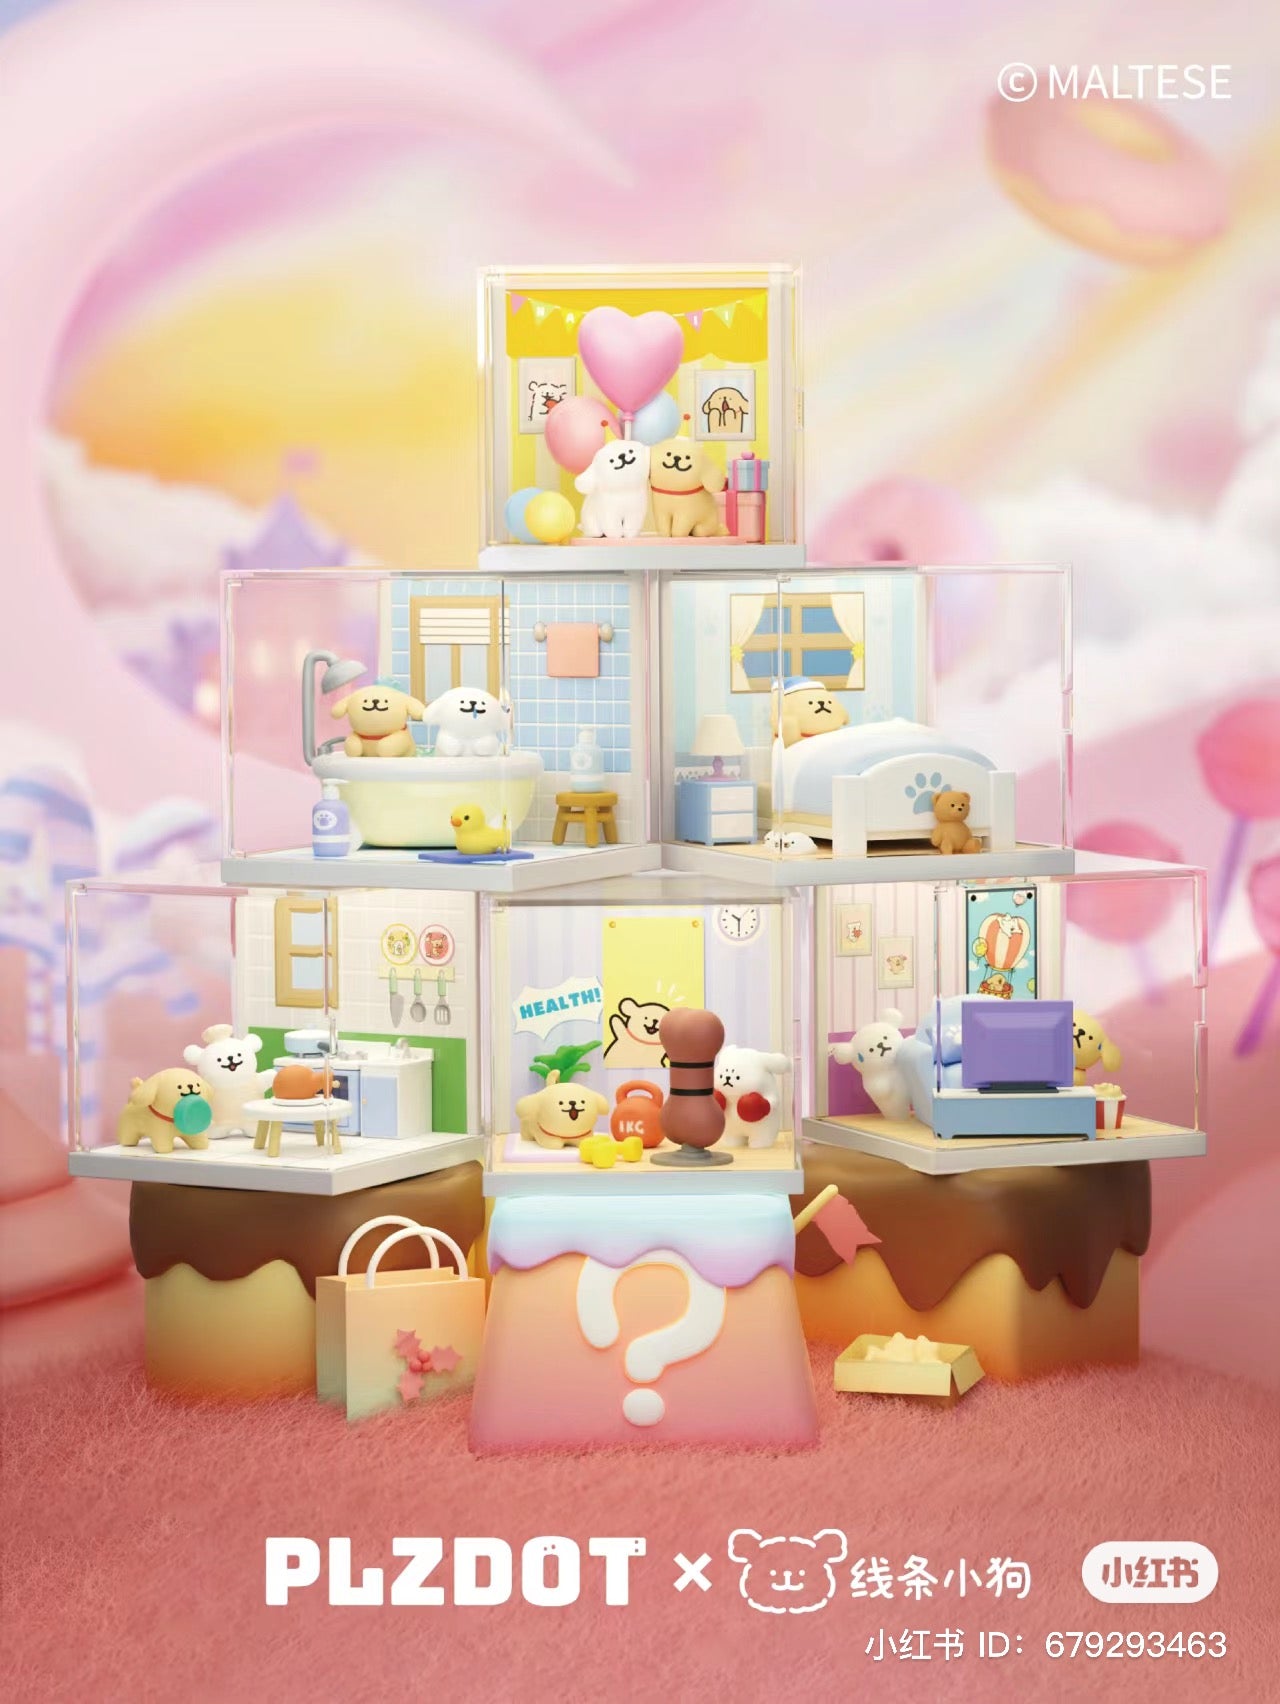 Maltese's Everyday Moment Blind Box Series: Toy house, stuffed animals, balloons, and more in a whimsical scene.